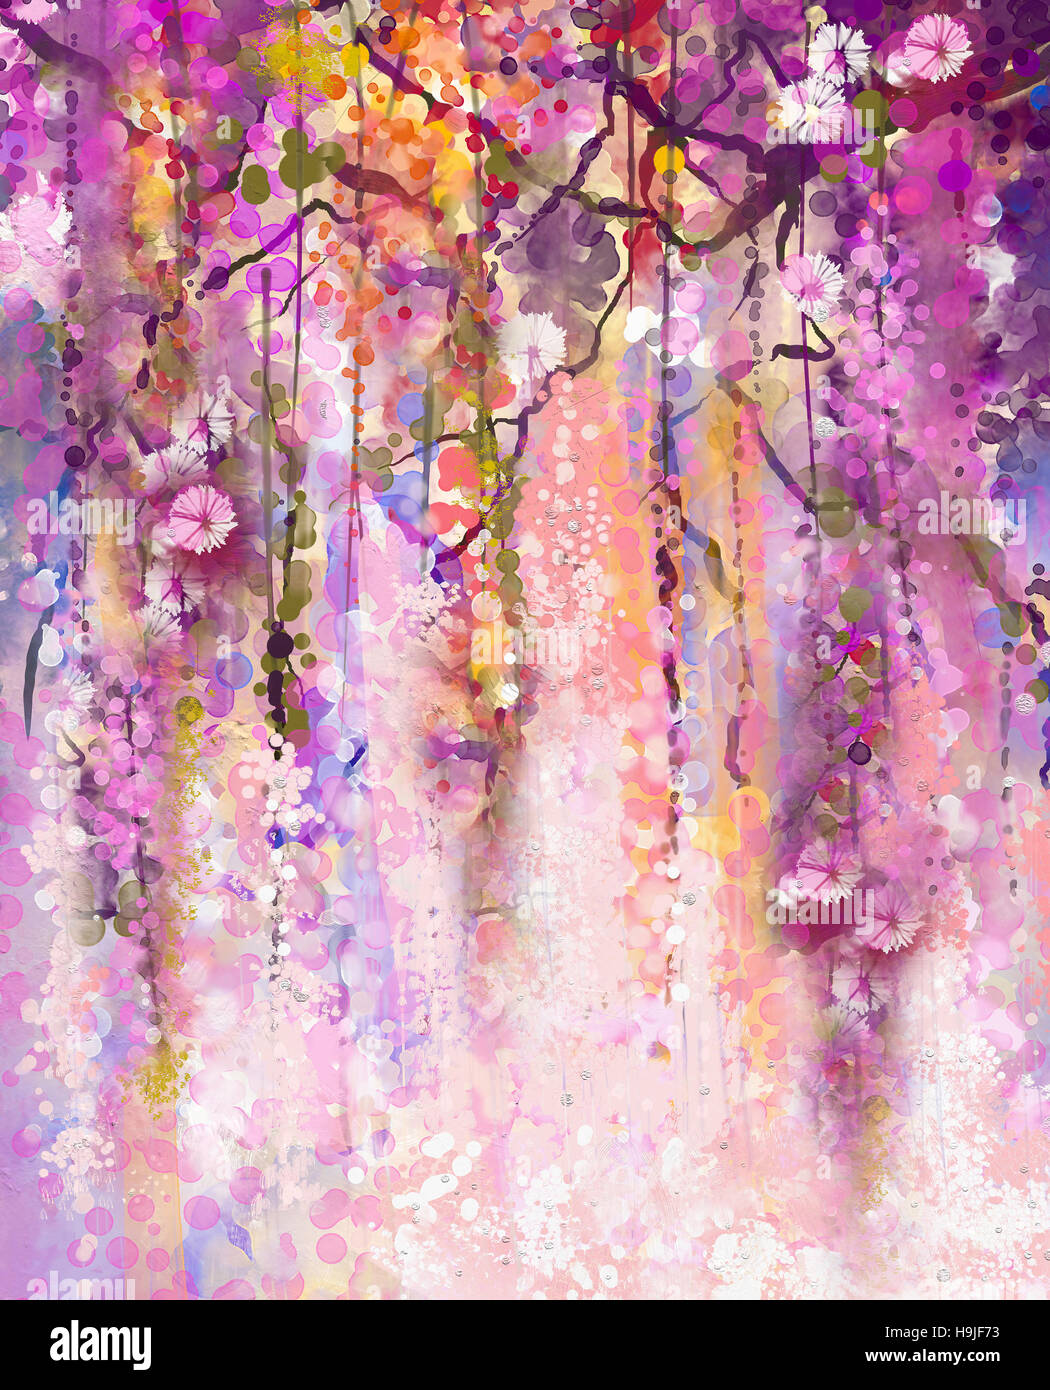 Abstract flowers watercolor painting. Spring purple flowers Wisteria background Stock Photo